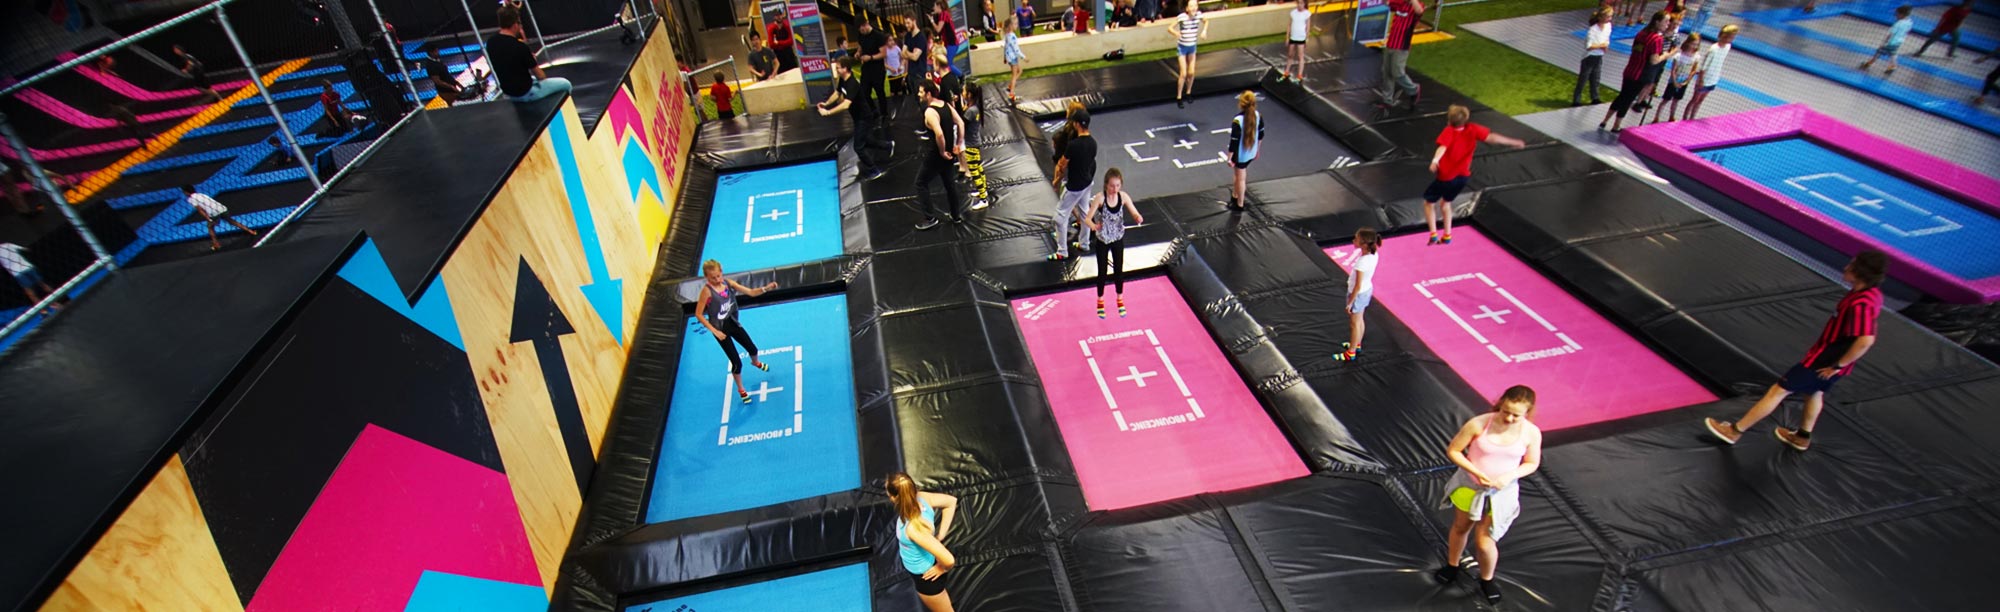 BOUNCE Singapore High Performance Area with Olympic Grade Trampolines